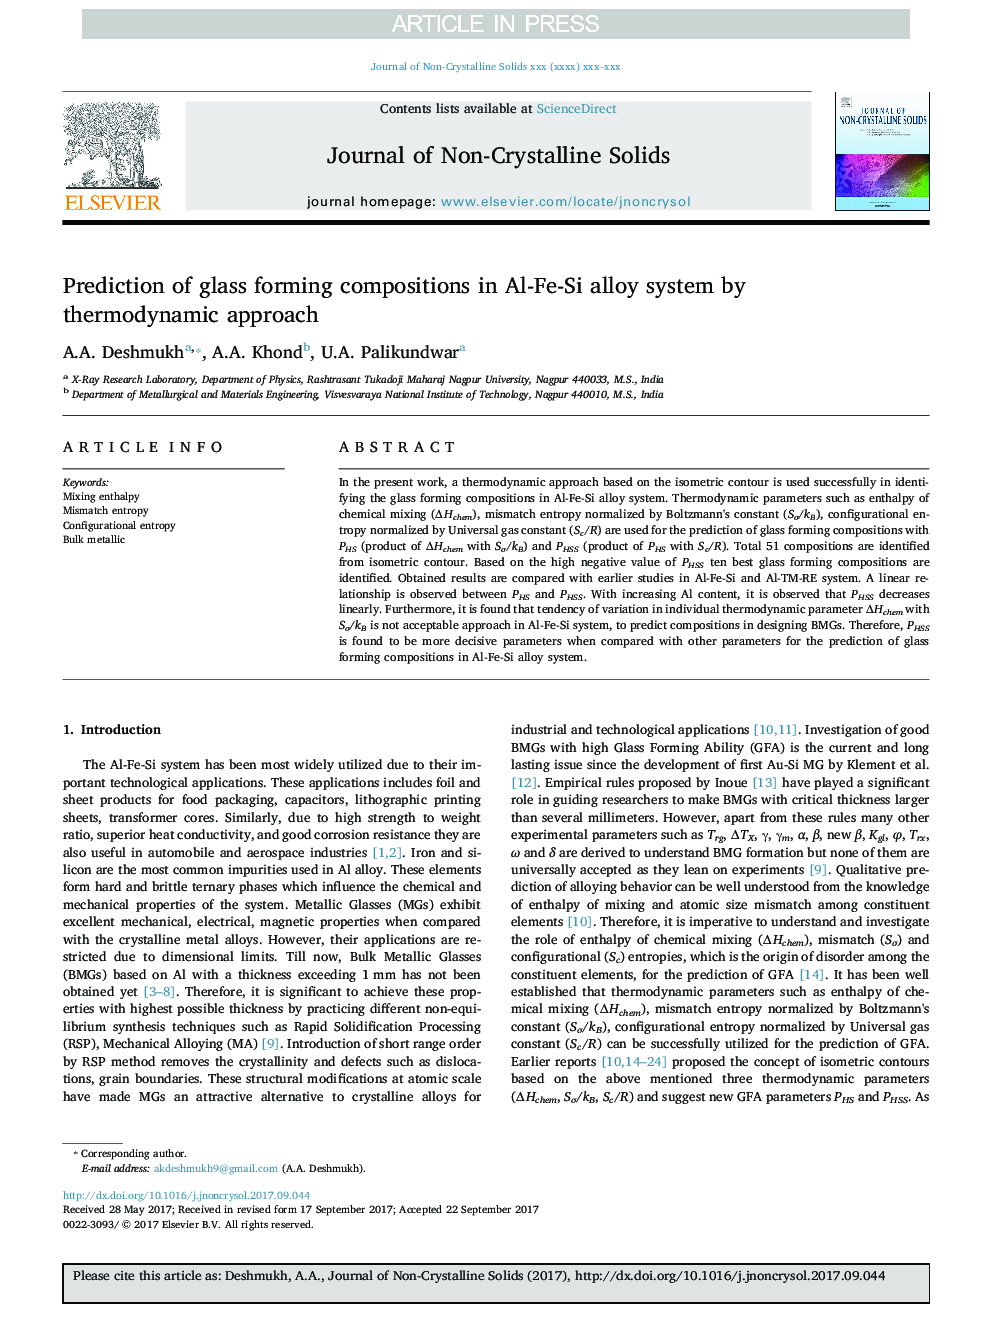 Prediction of glass forming compositions in Al-Fe-Si alloy system by thermodynamic approach